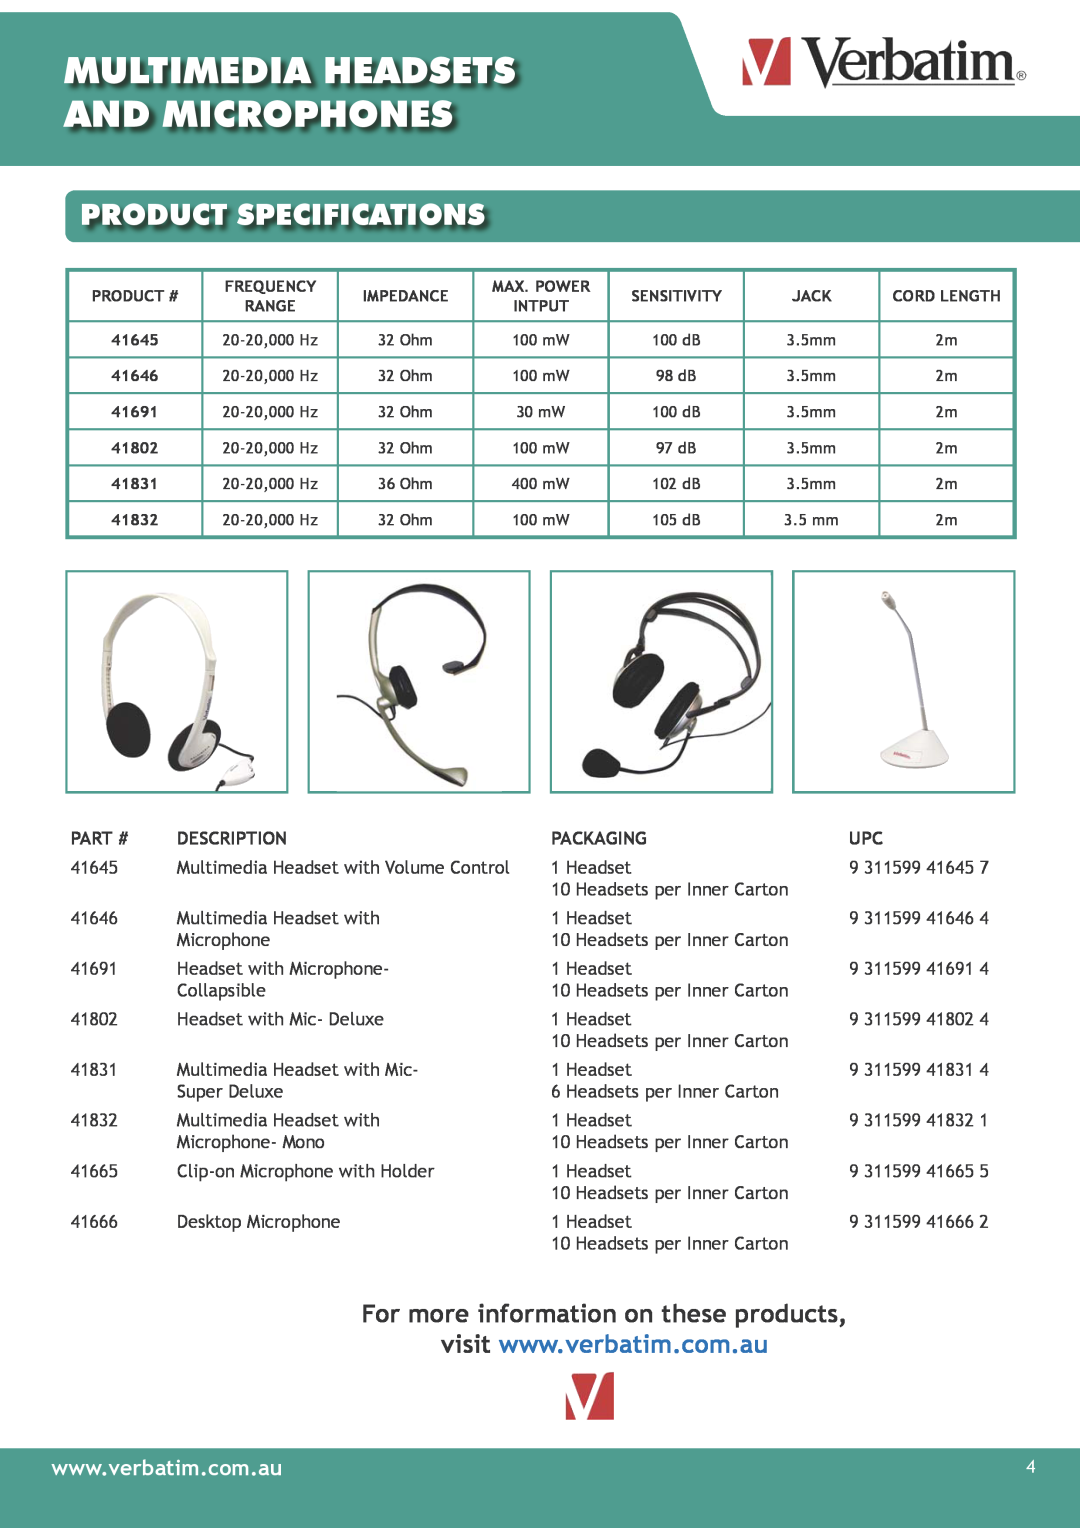 Verbatim Multimedia Headsets & Microphones manual Product Specifications, Part #, Description, Packaging 